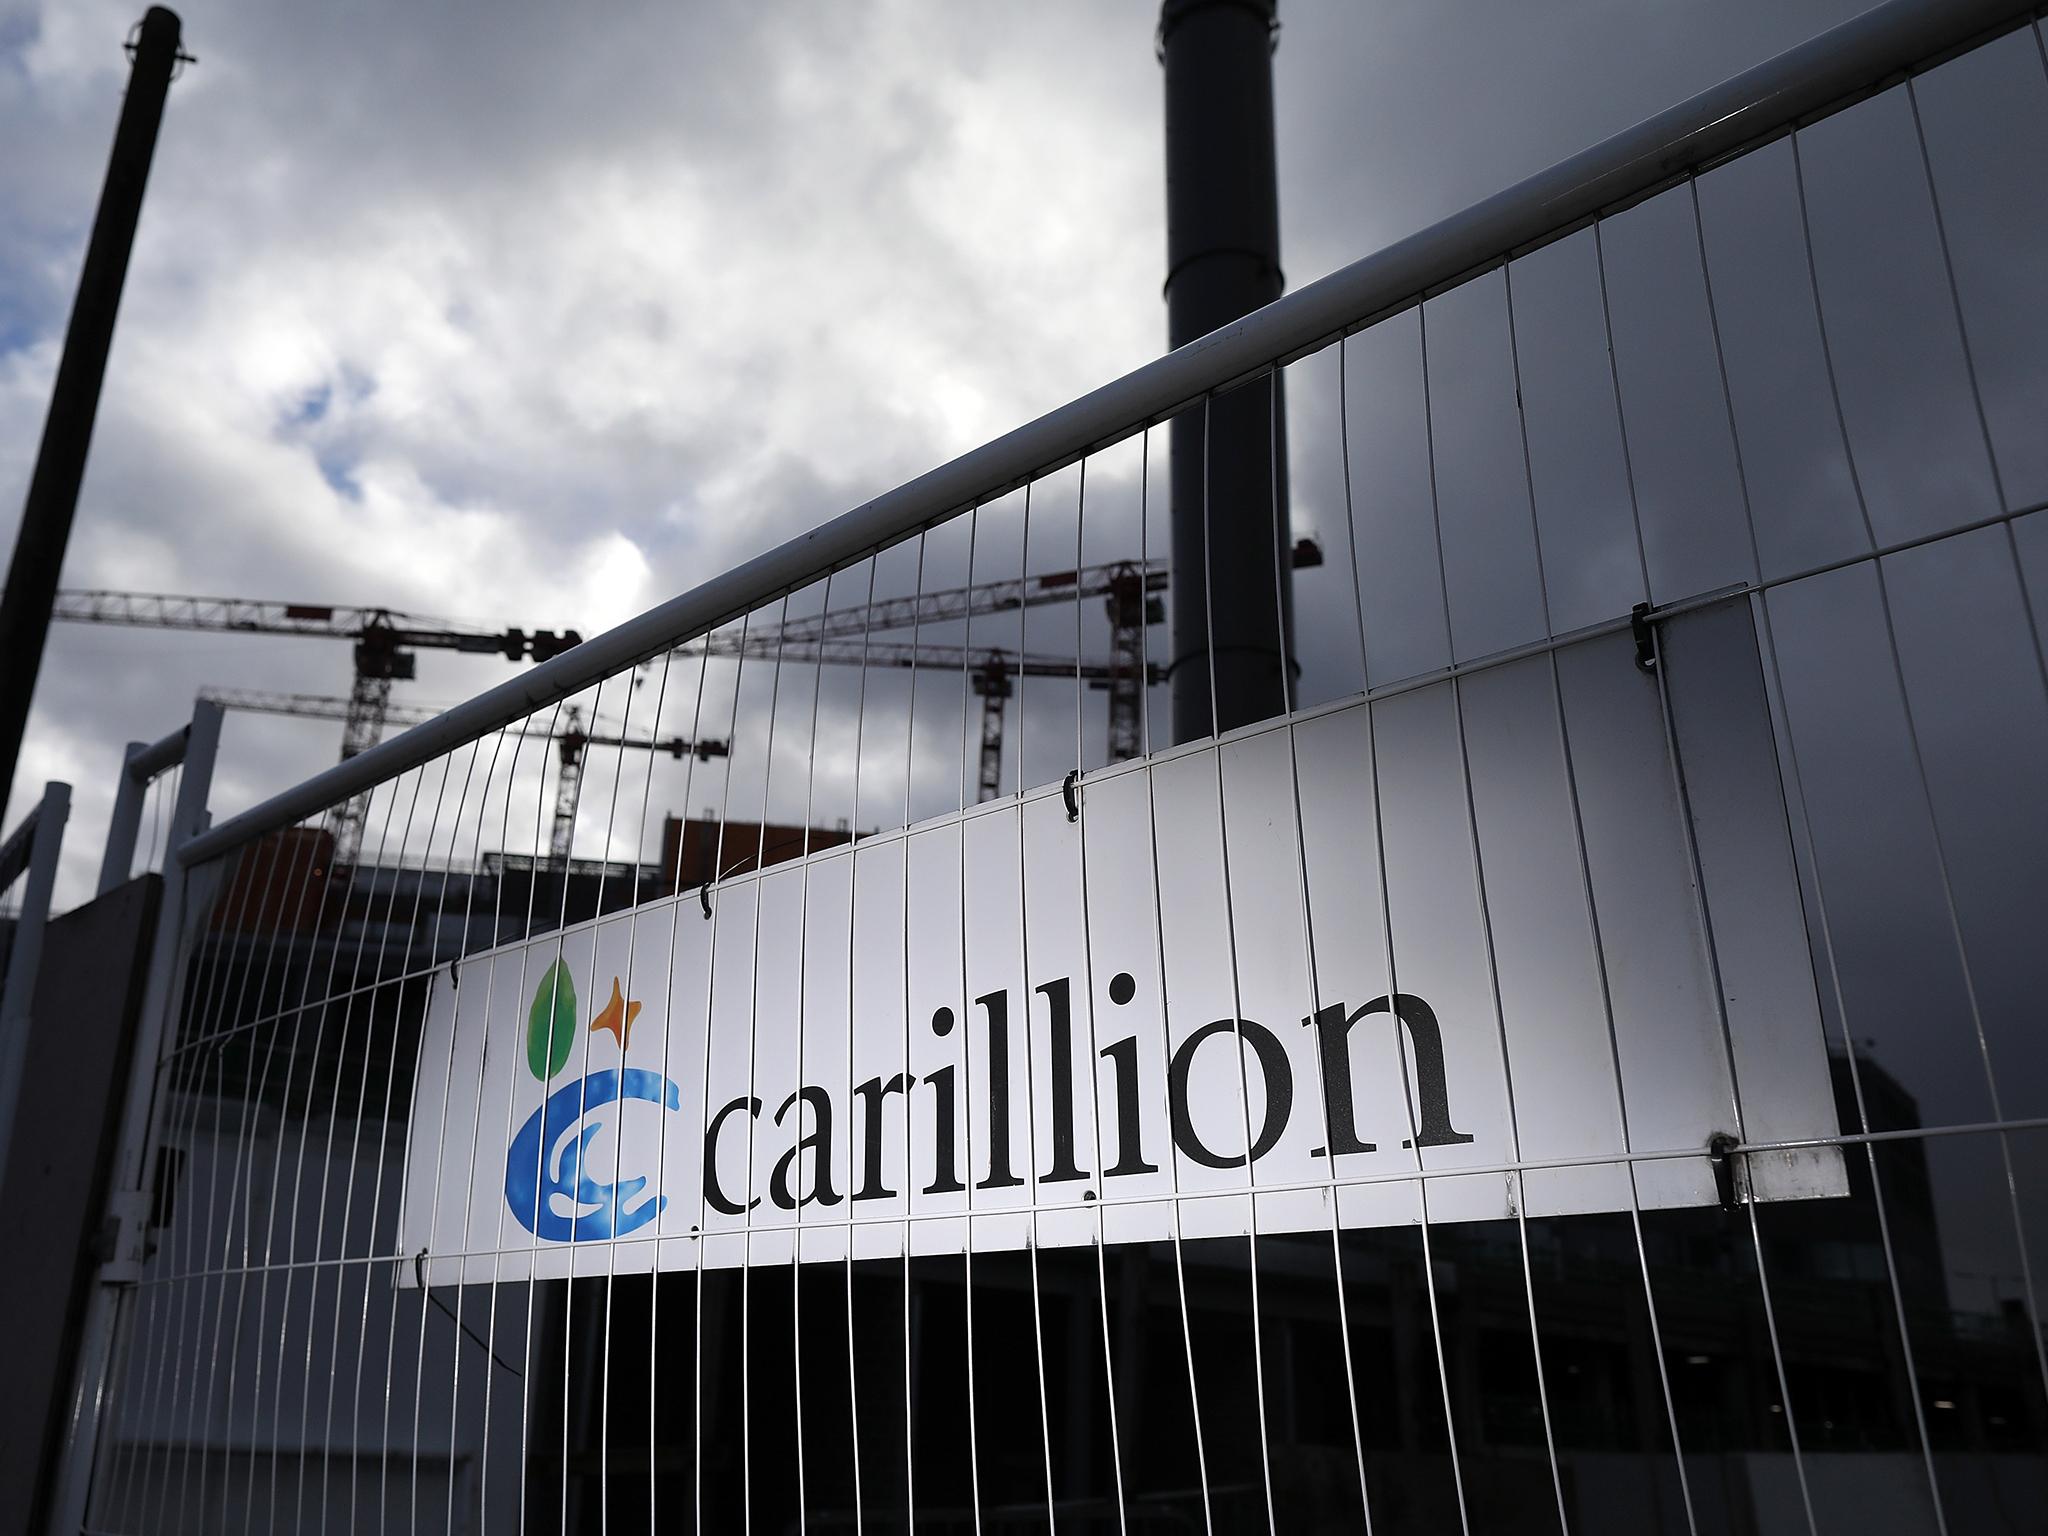 A total of 989 jobs have been lost since Carillion's collapse